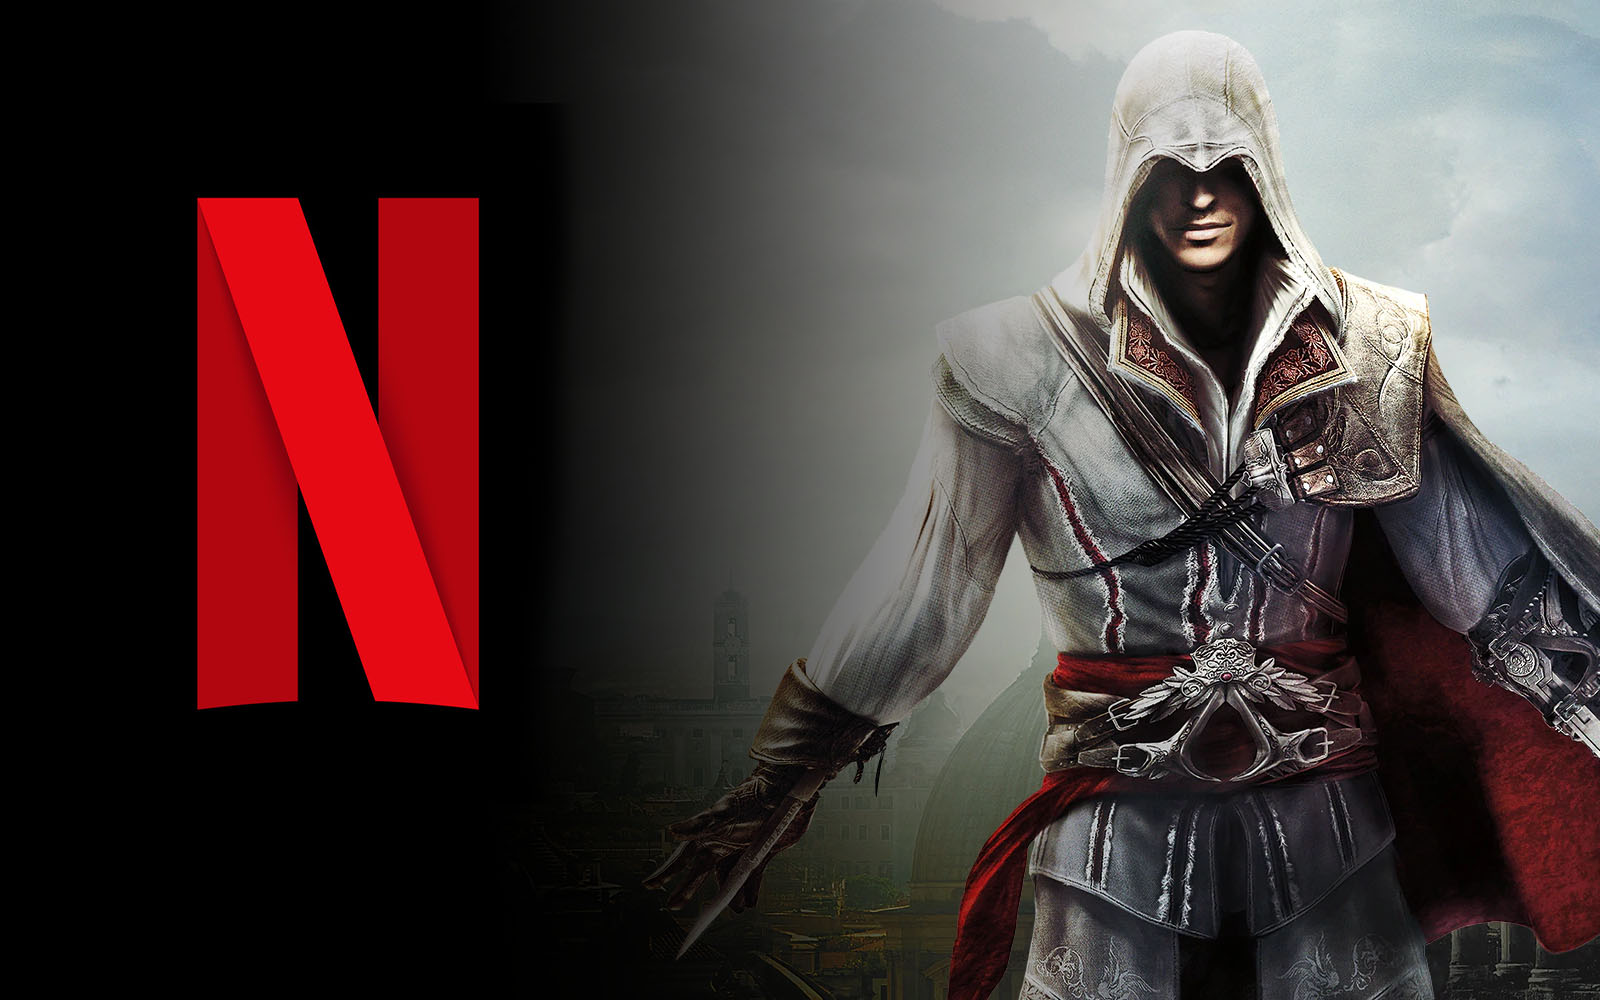 ‘Assassin’s Creed’ Live-Action TV Series In Works At Netflix